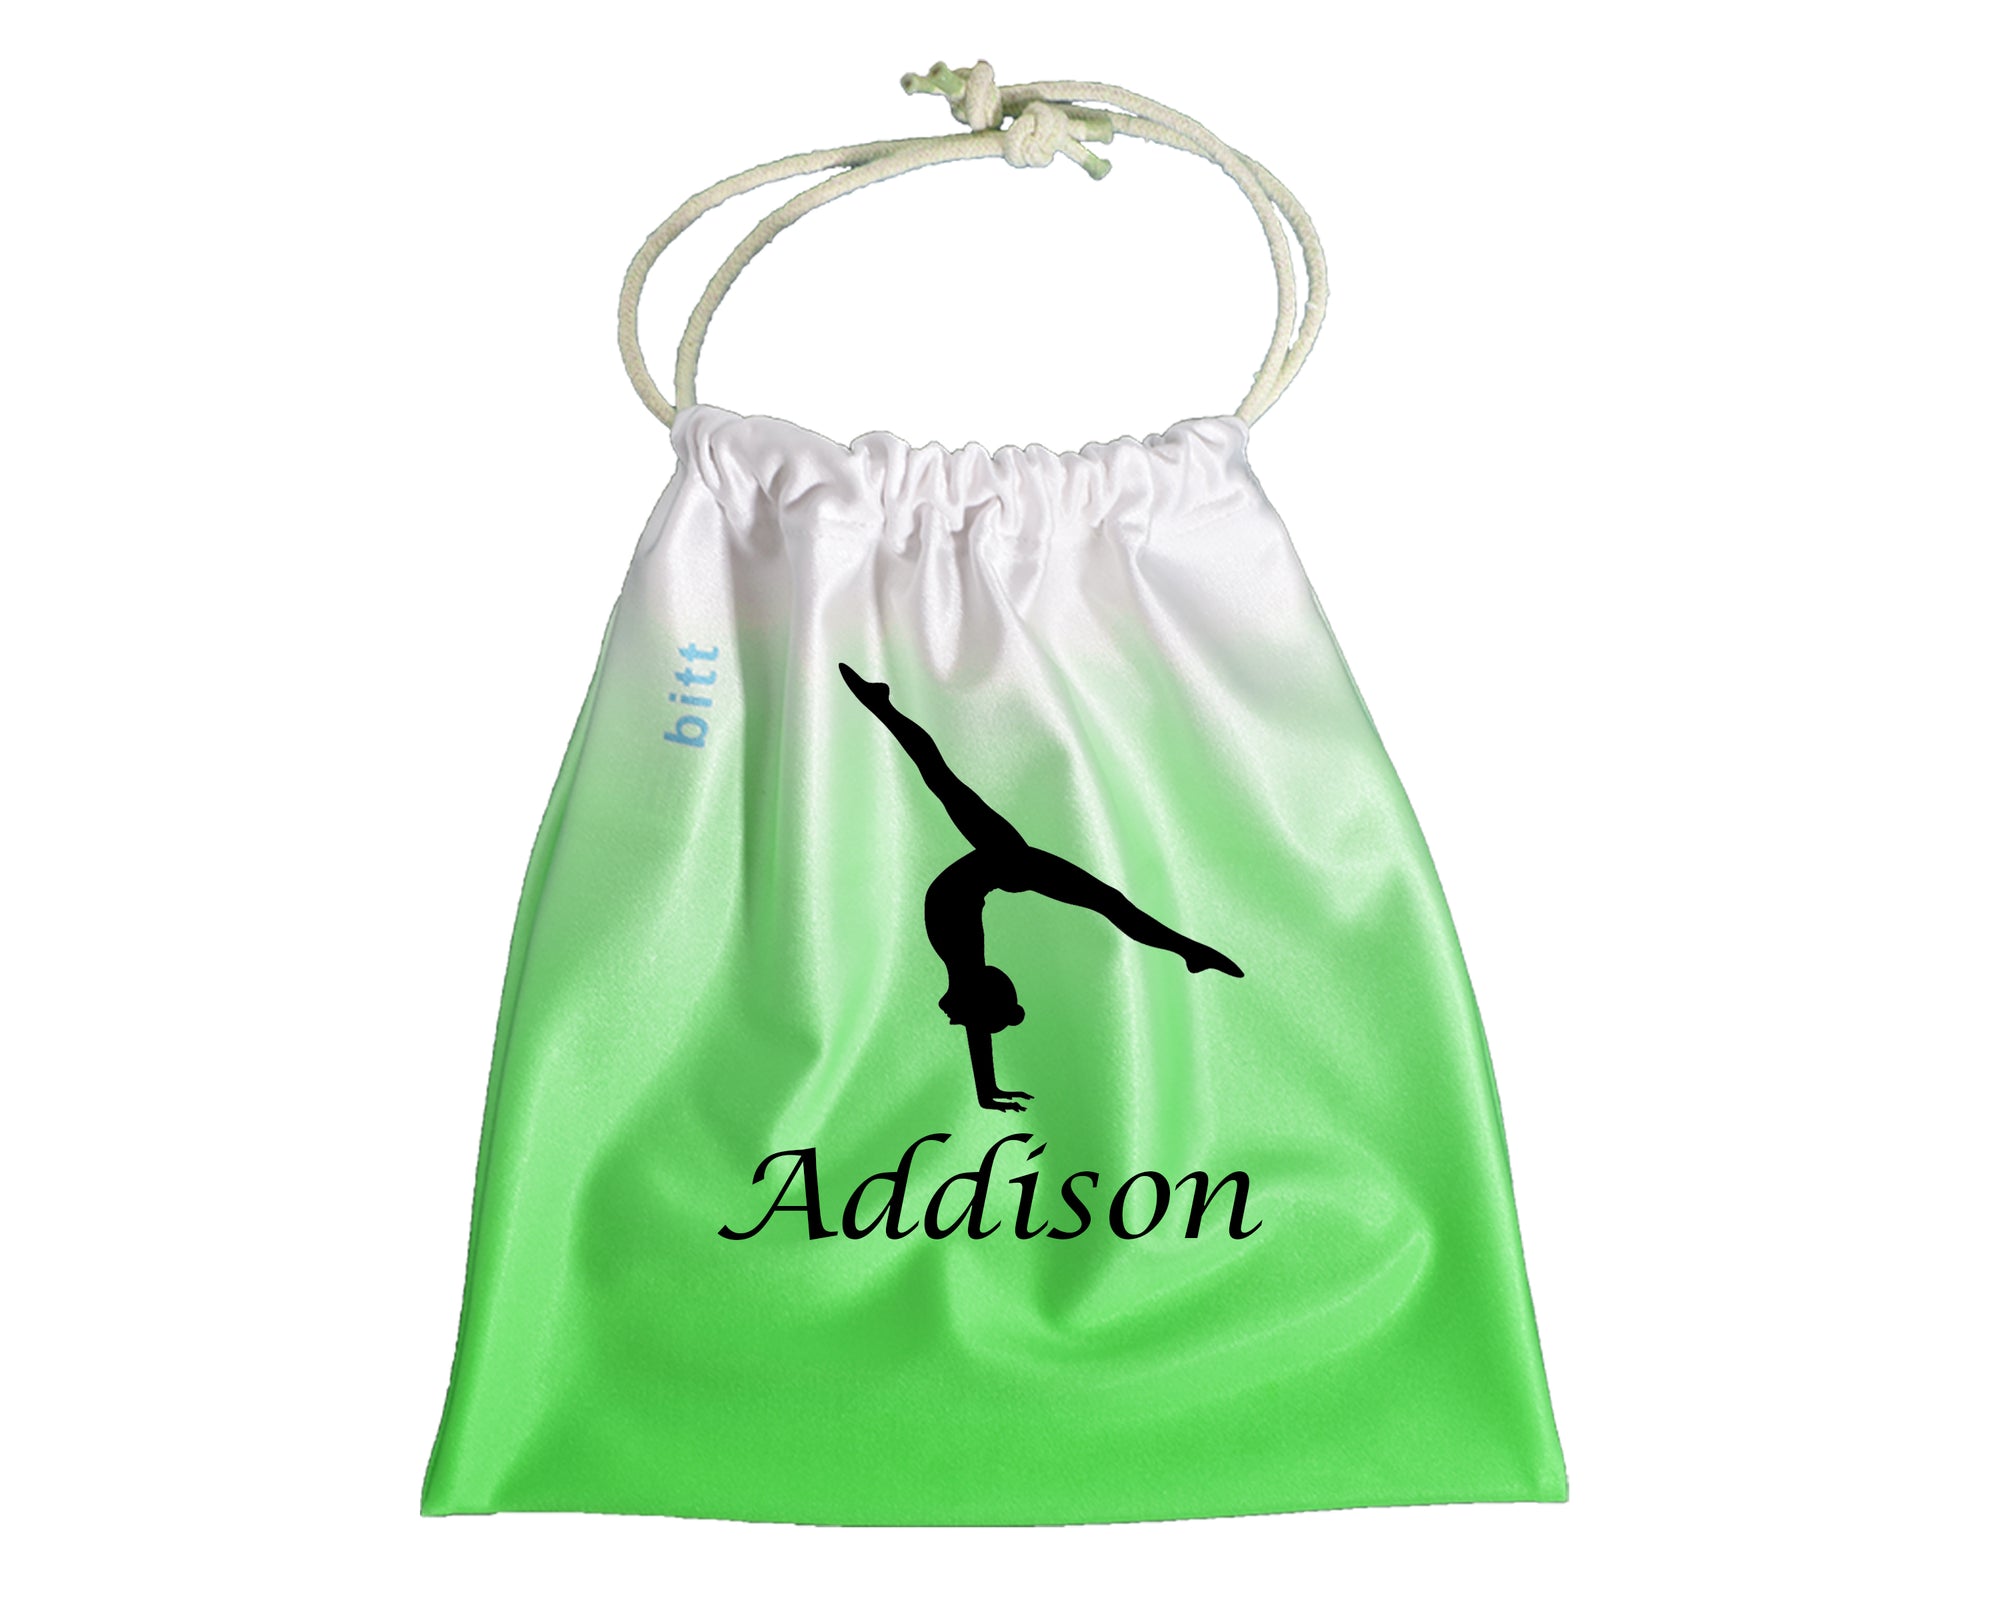 Personlized Gymnastics Grip Bag with Split Handstand in Lime Green & White Ombre